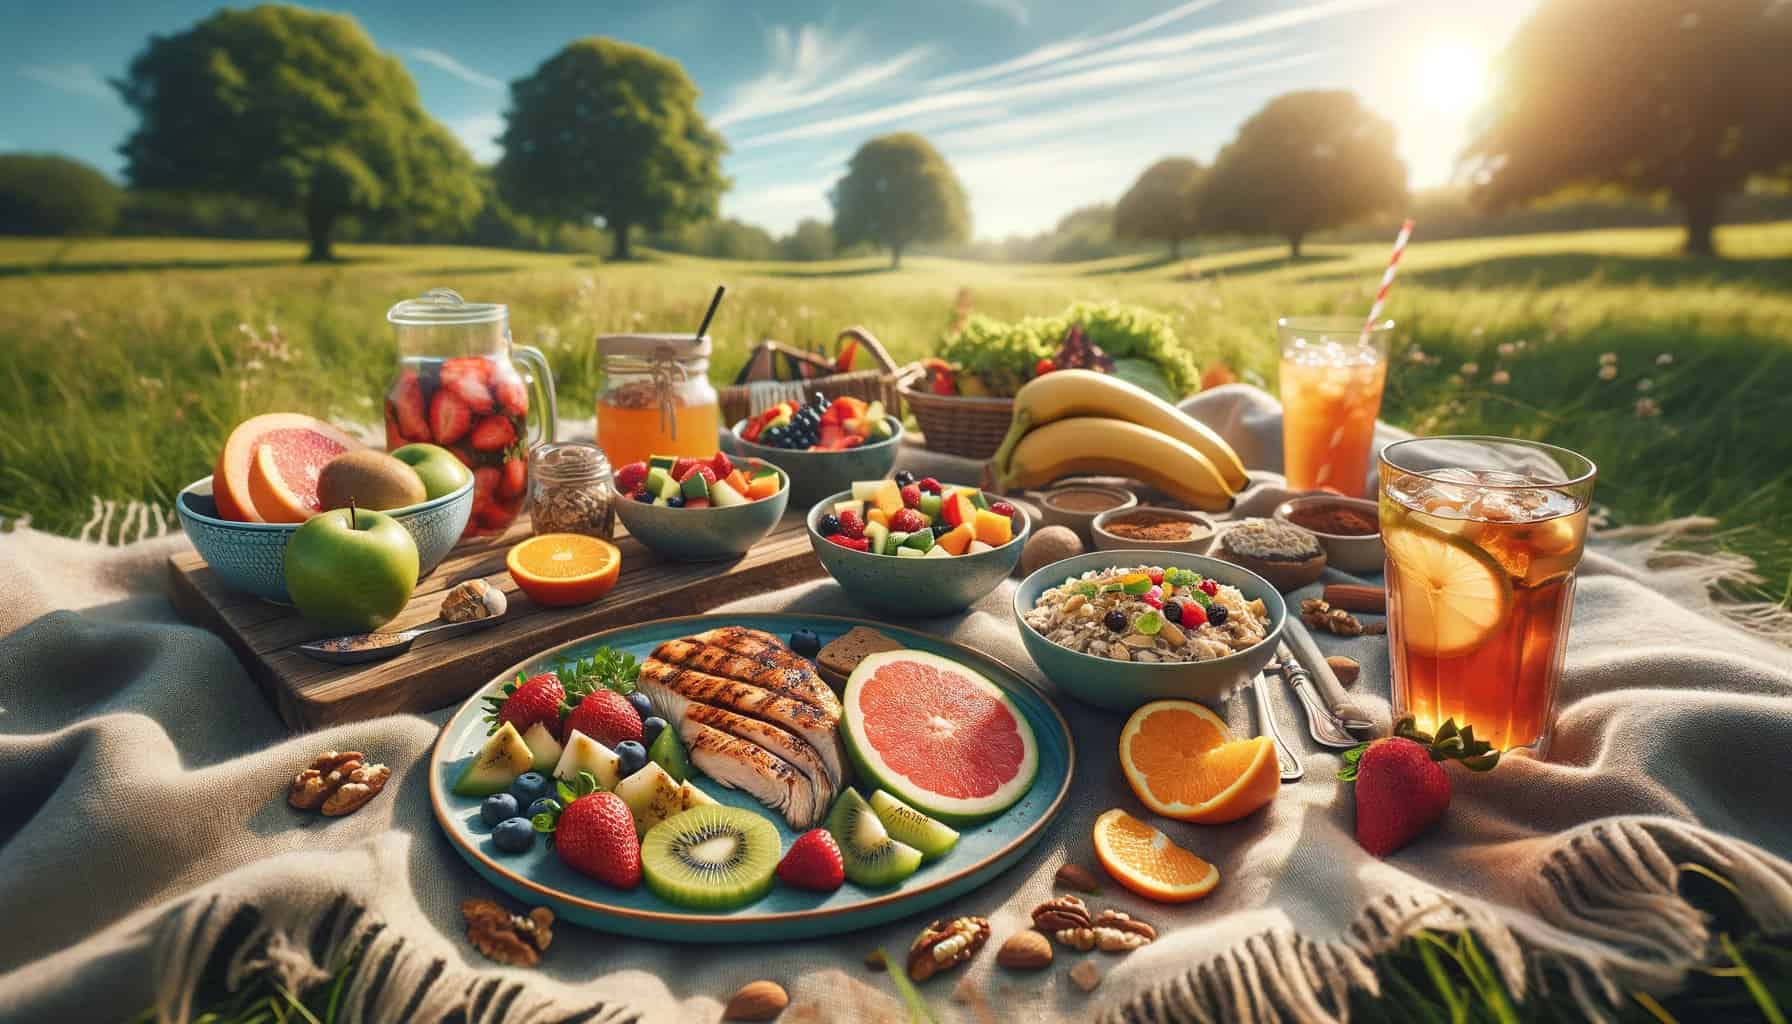 A serene outdoor picnic scene with a spread of food items beneficial for blood sugar control